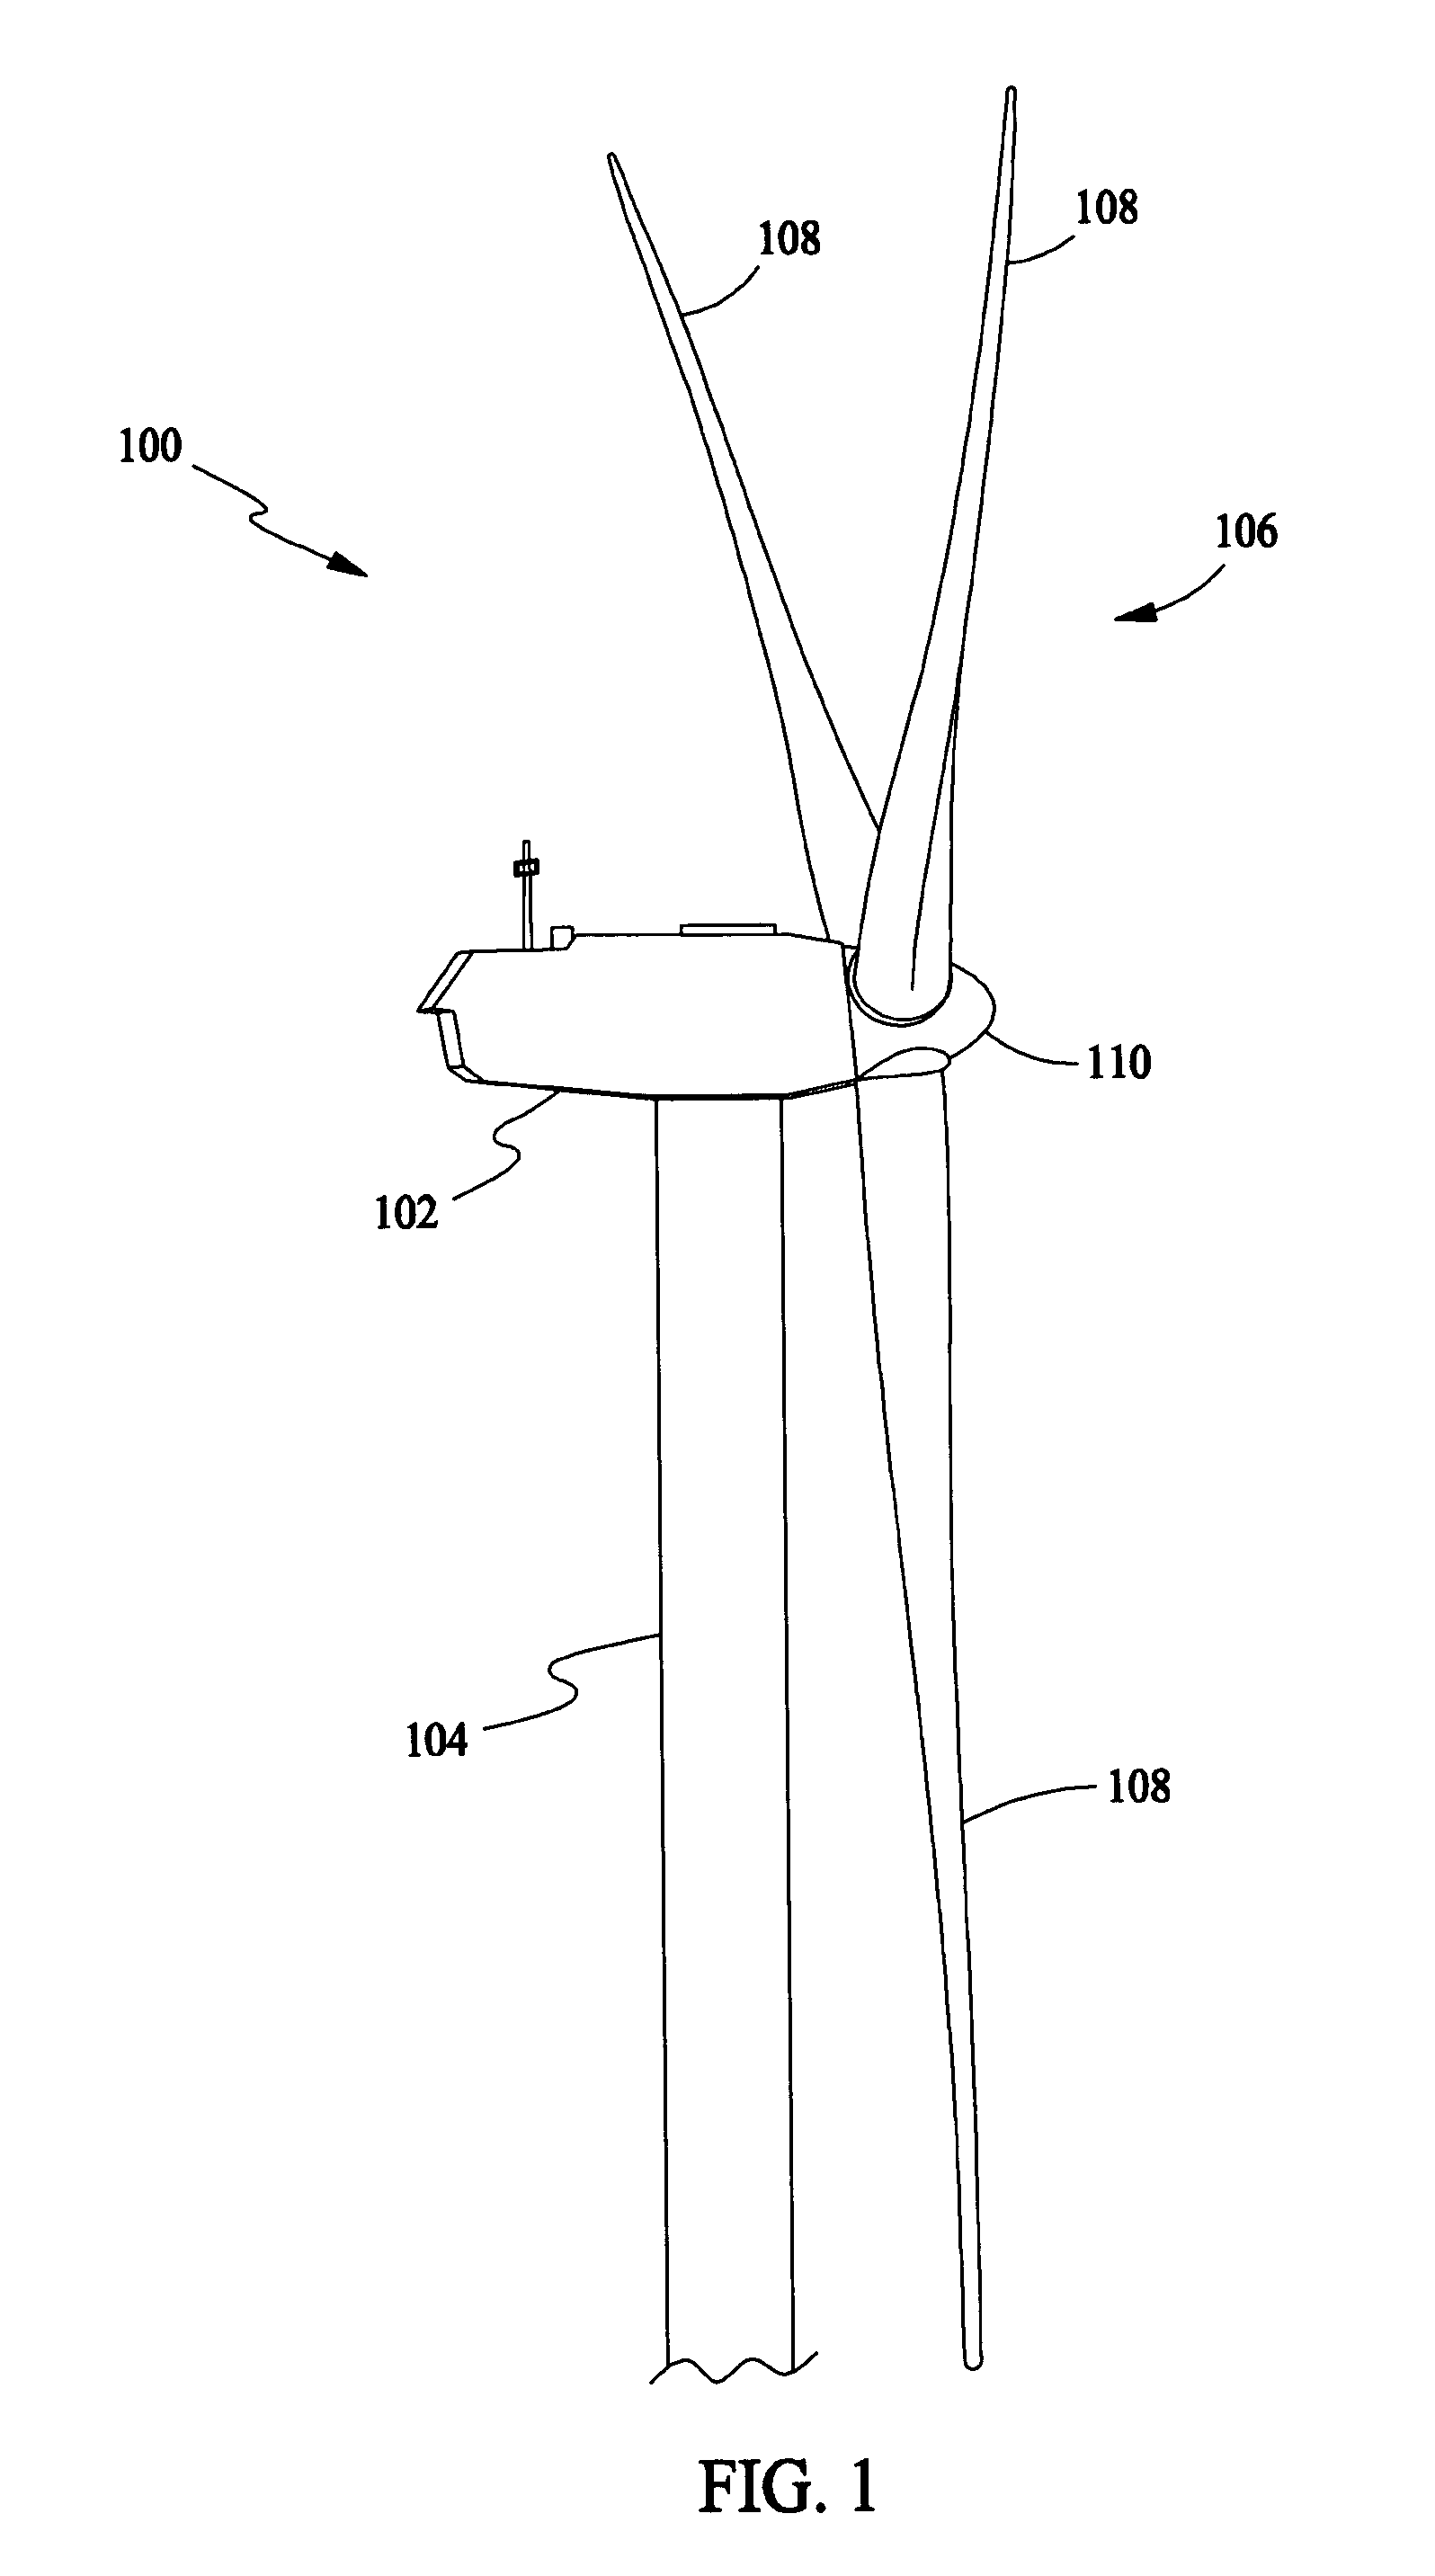 Method and apparatus for reducing rotor blade deflections, loads, and/or peak rotational speed